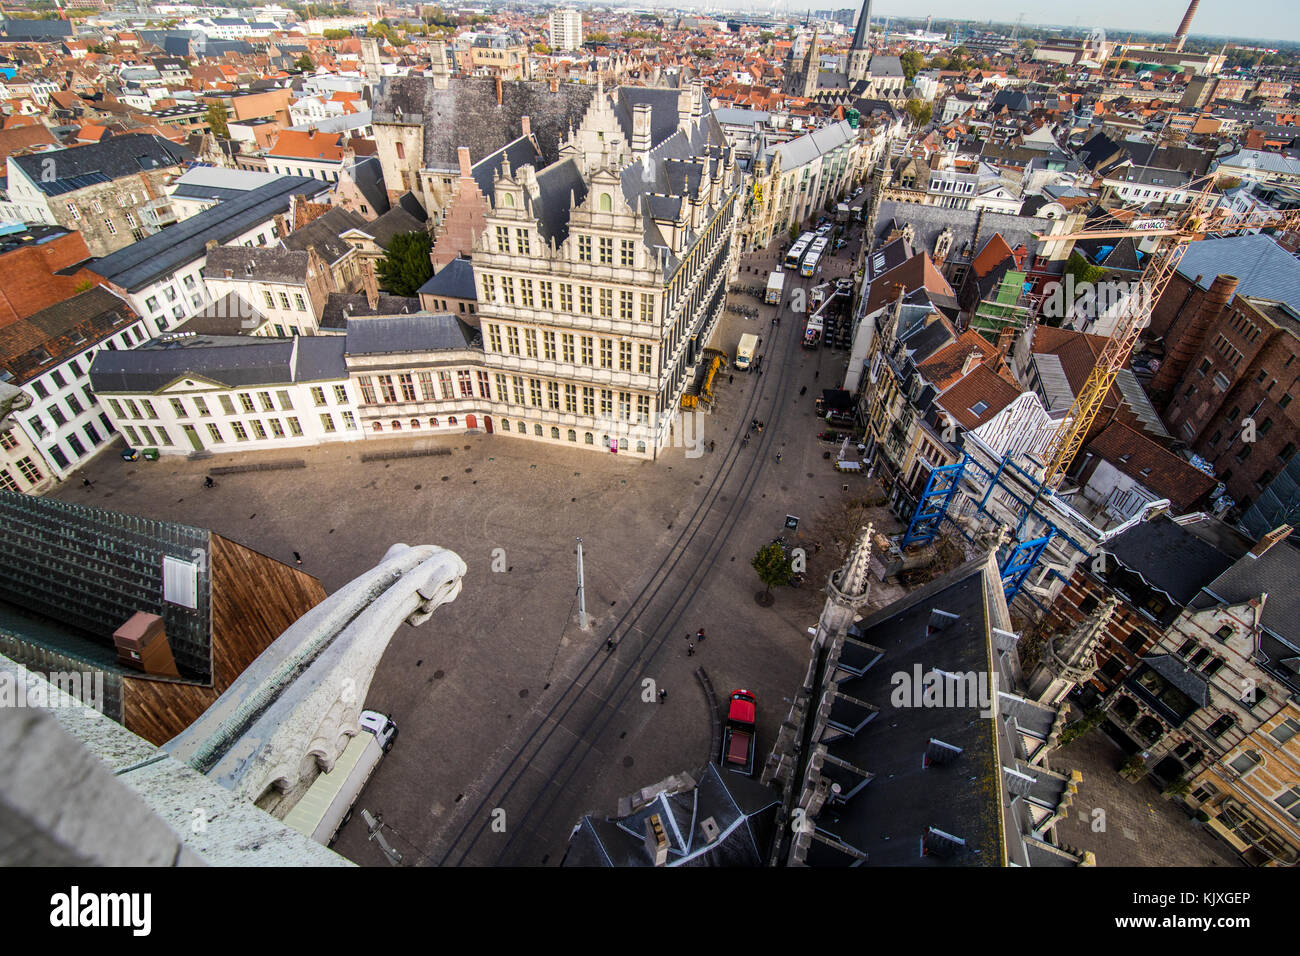 GHENT, BELGIUM - November, 2017: Aerial view of Architecture of Ghent city center. Ghent is medieval city and point of tourist destination in Belgium. Stock Photo